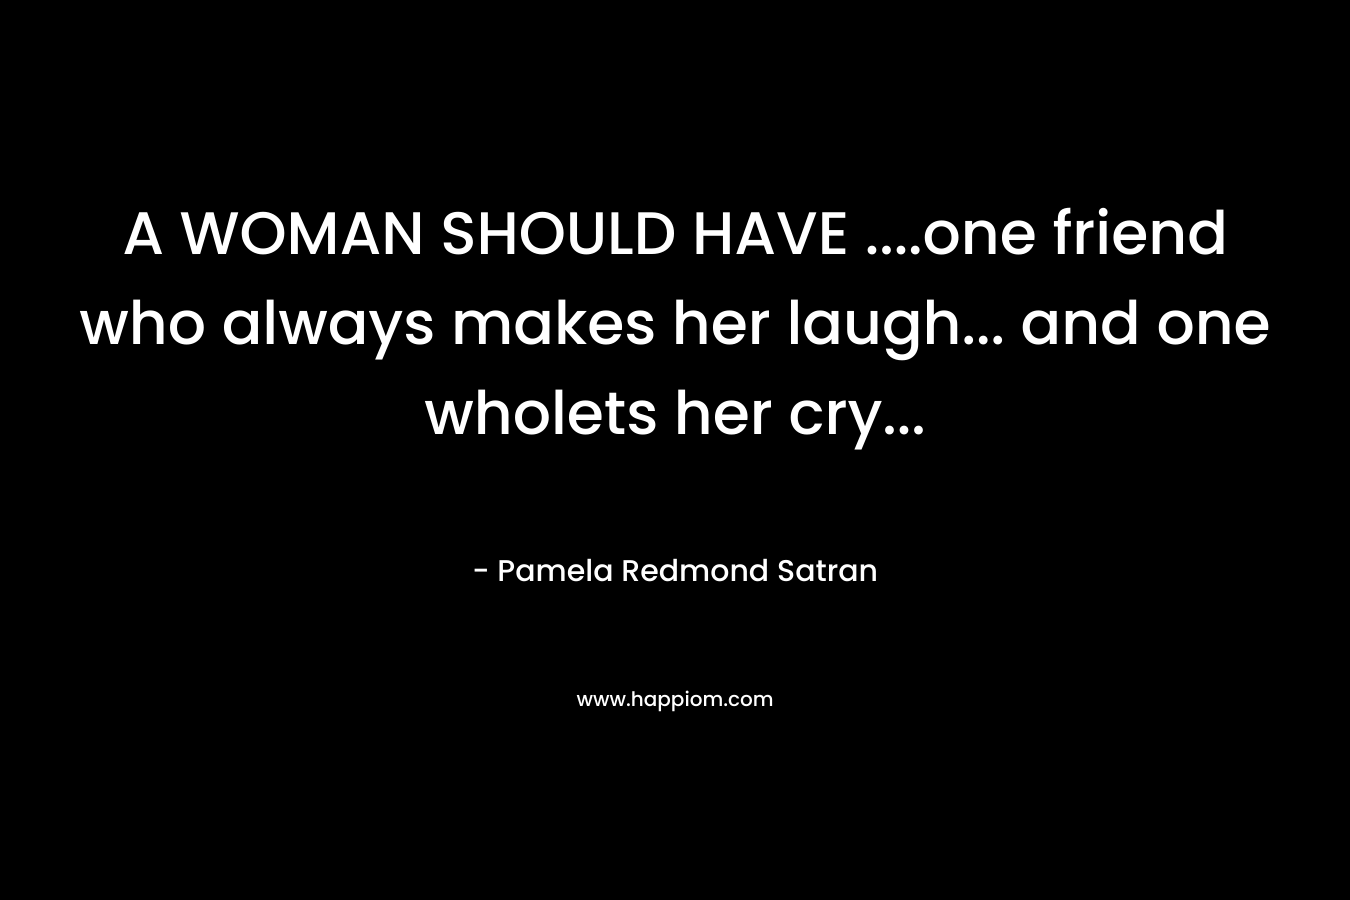 A WOMAN SHOULD HAVE ….one friend who always makes her laugh… and one wholets her cry… – Pamela Redmond Satran